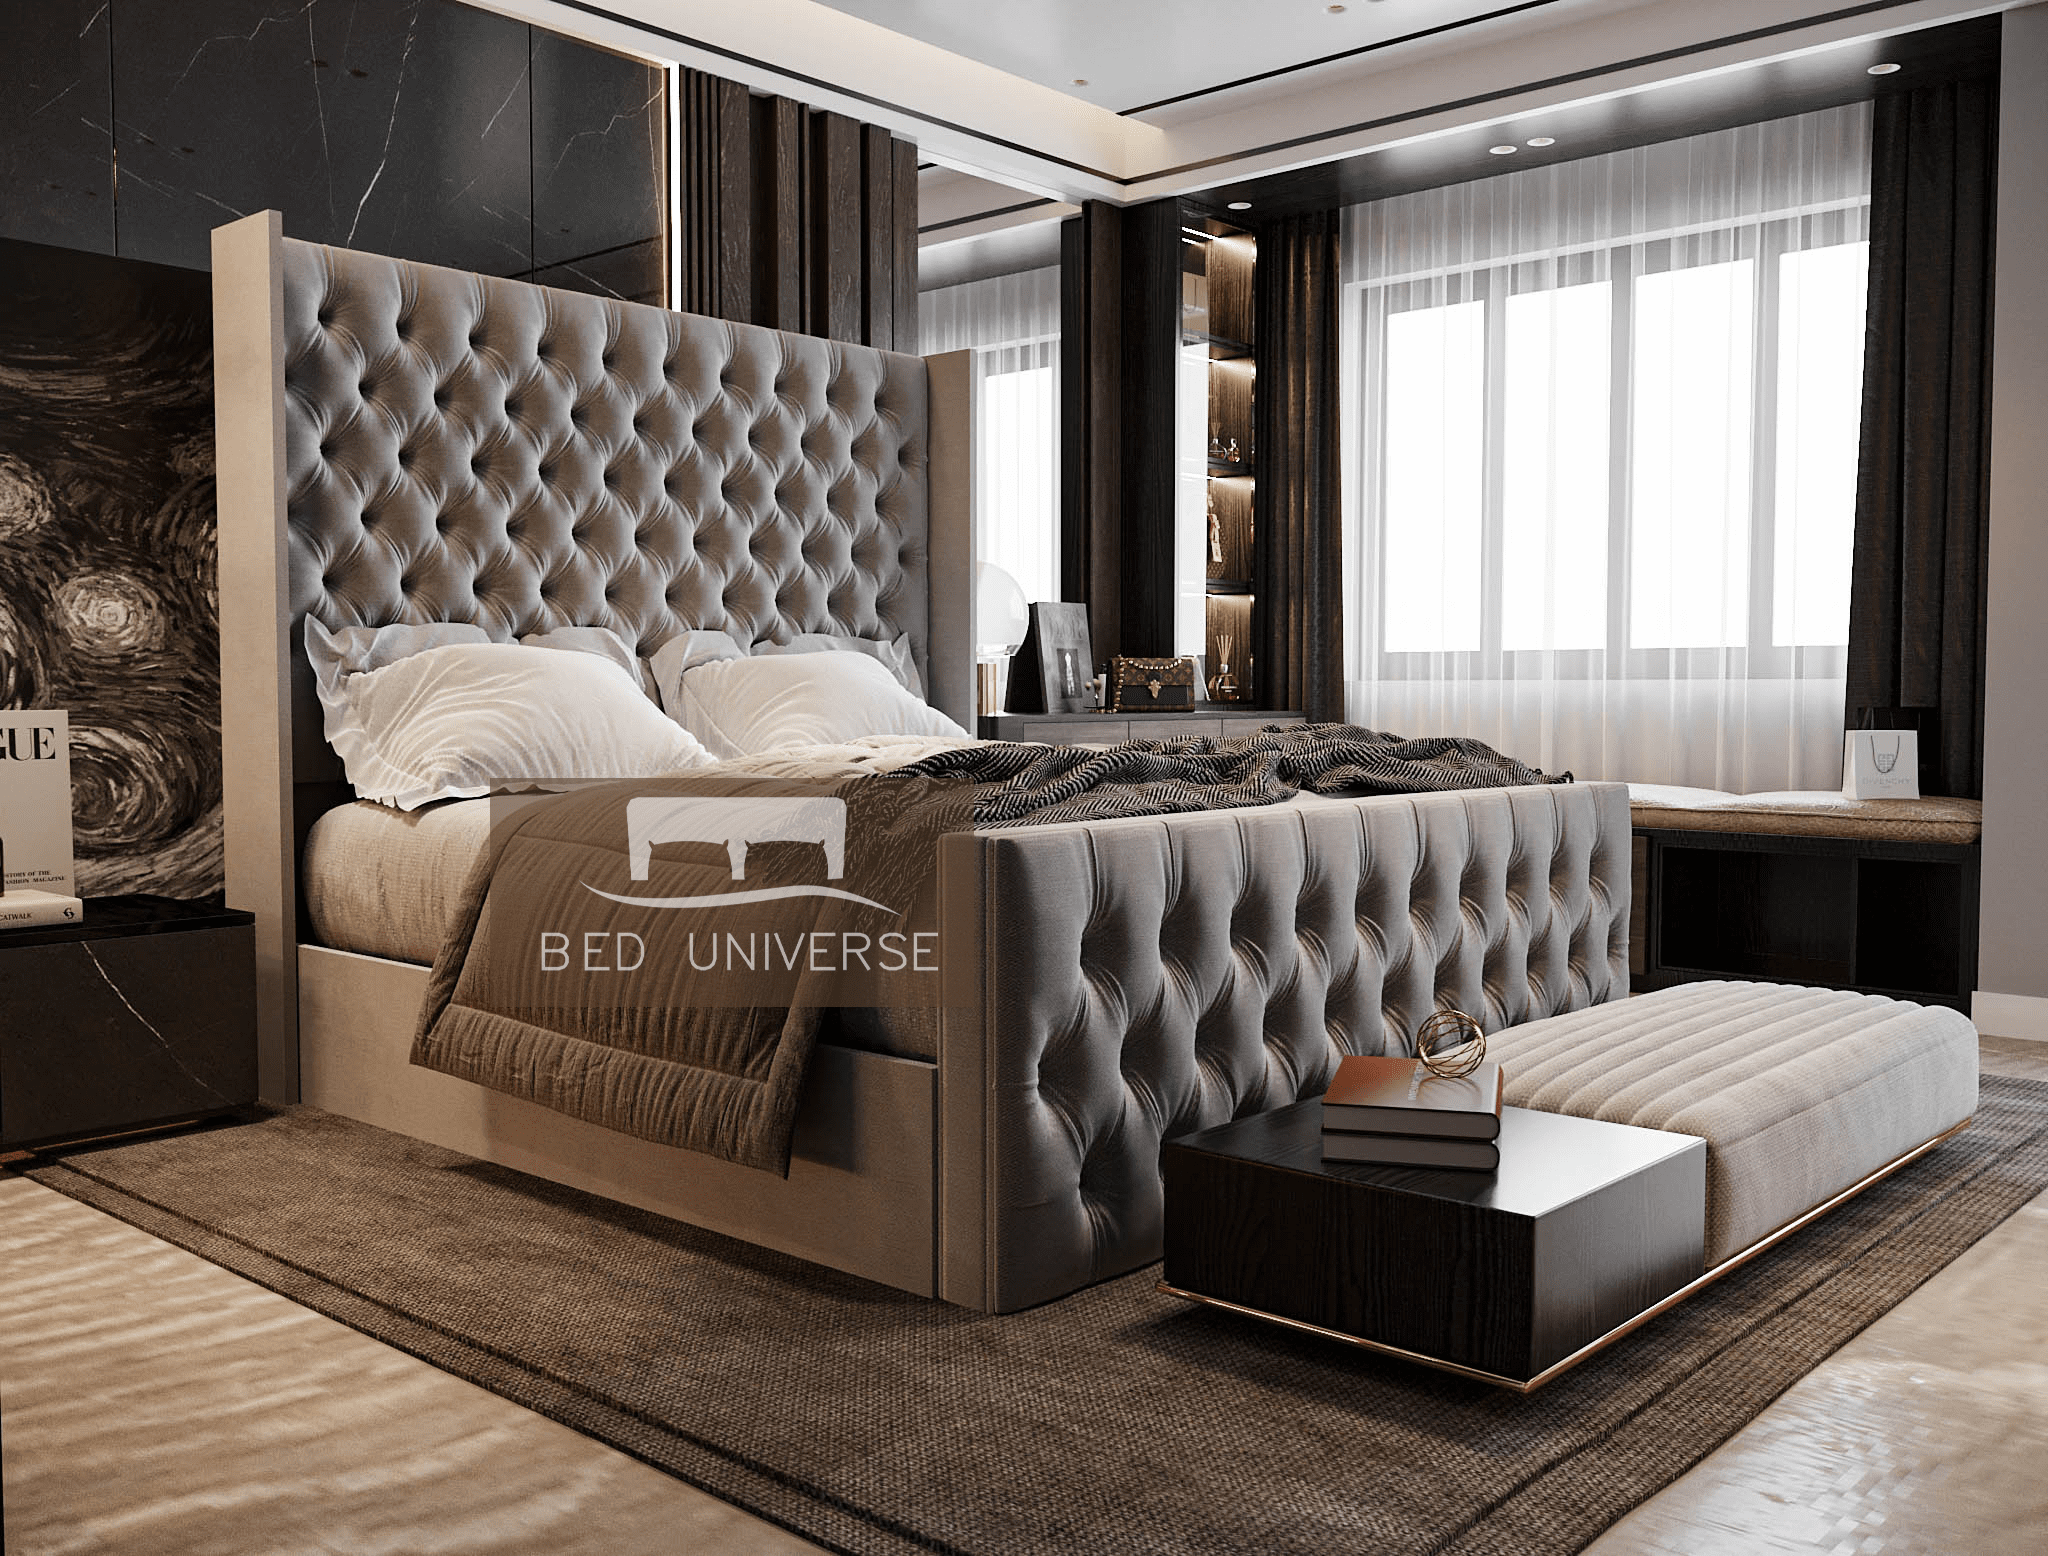 Elle Chesterfield Upholstered Winged Bed Frame, Winged Bed, Chesterfield Bed, Upholstered Bed, Fabric Bed, Grey Bed, Sotrage bed, Gas Lift Bed, Underbed storage